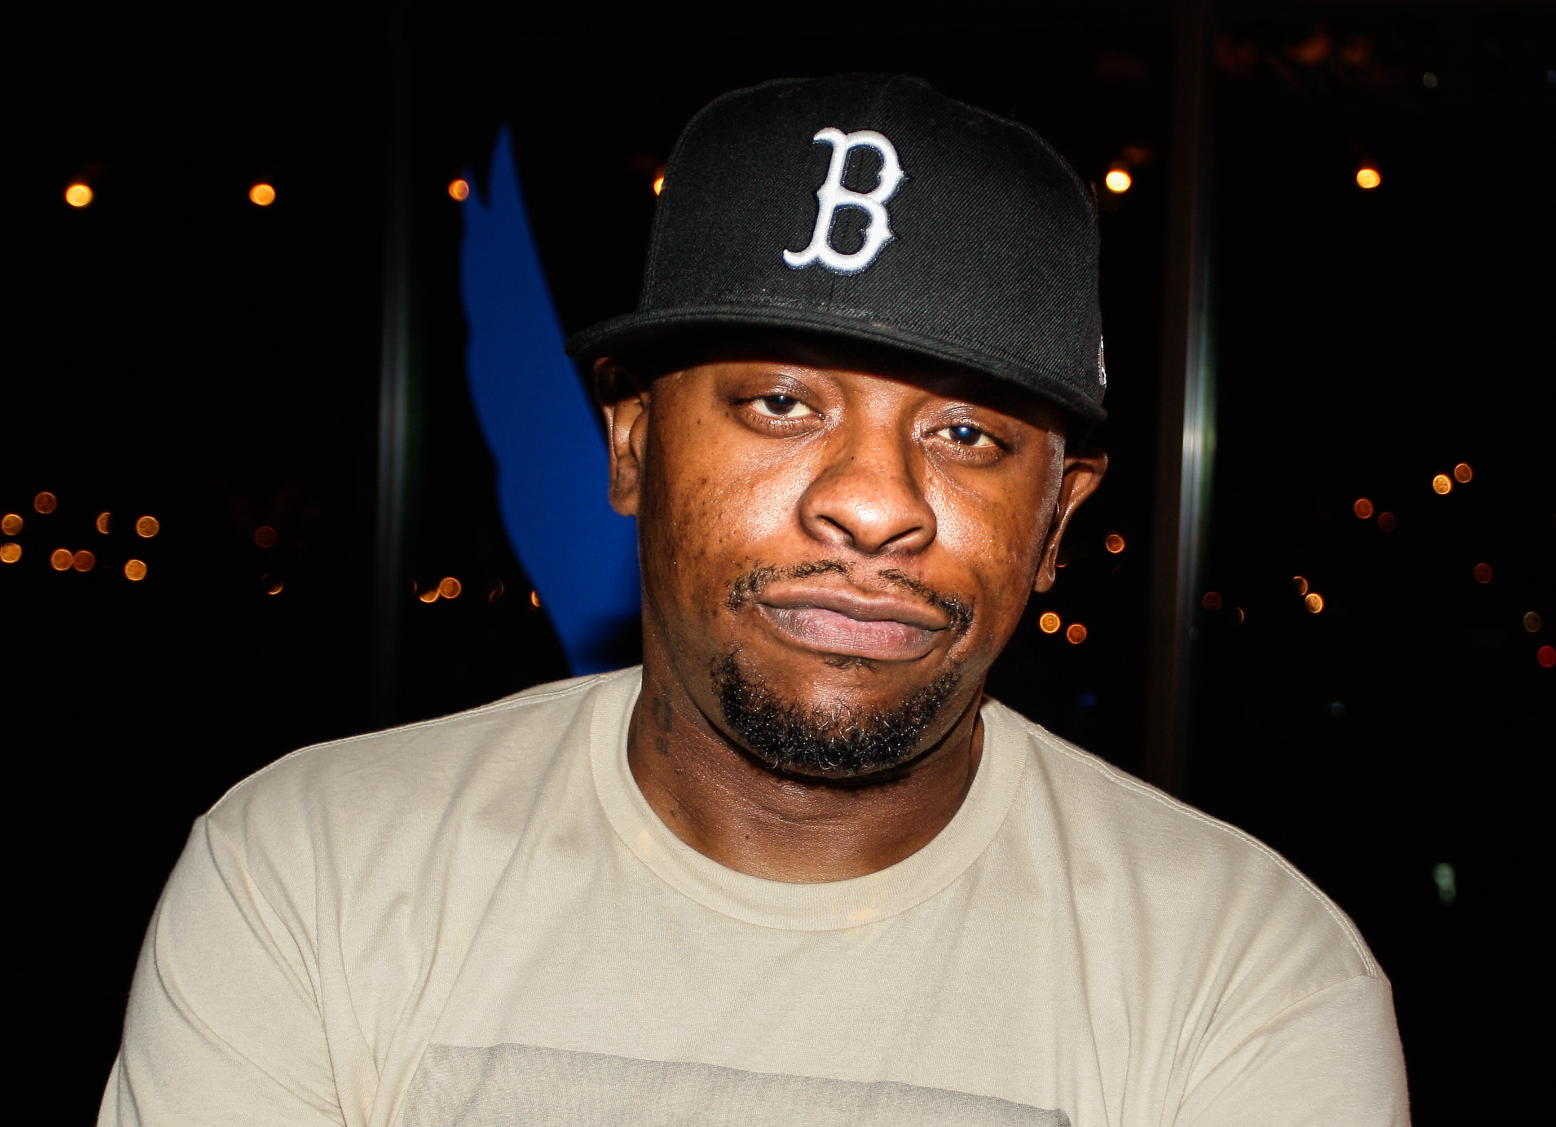 Rapper Scarface on dialysis after suffering kidney failure due to coronavirus